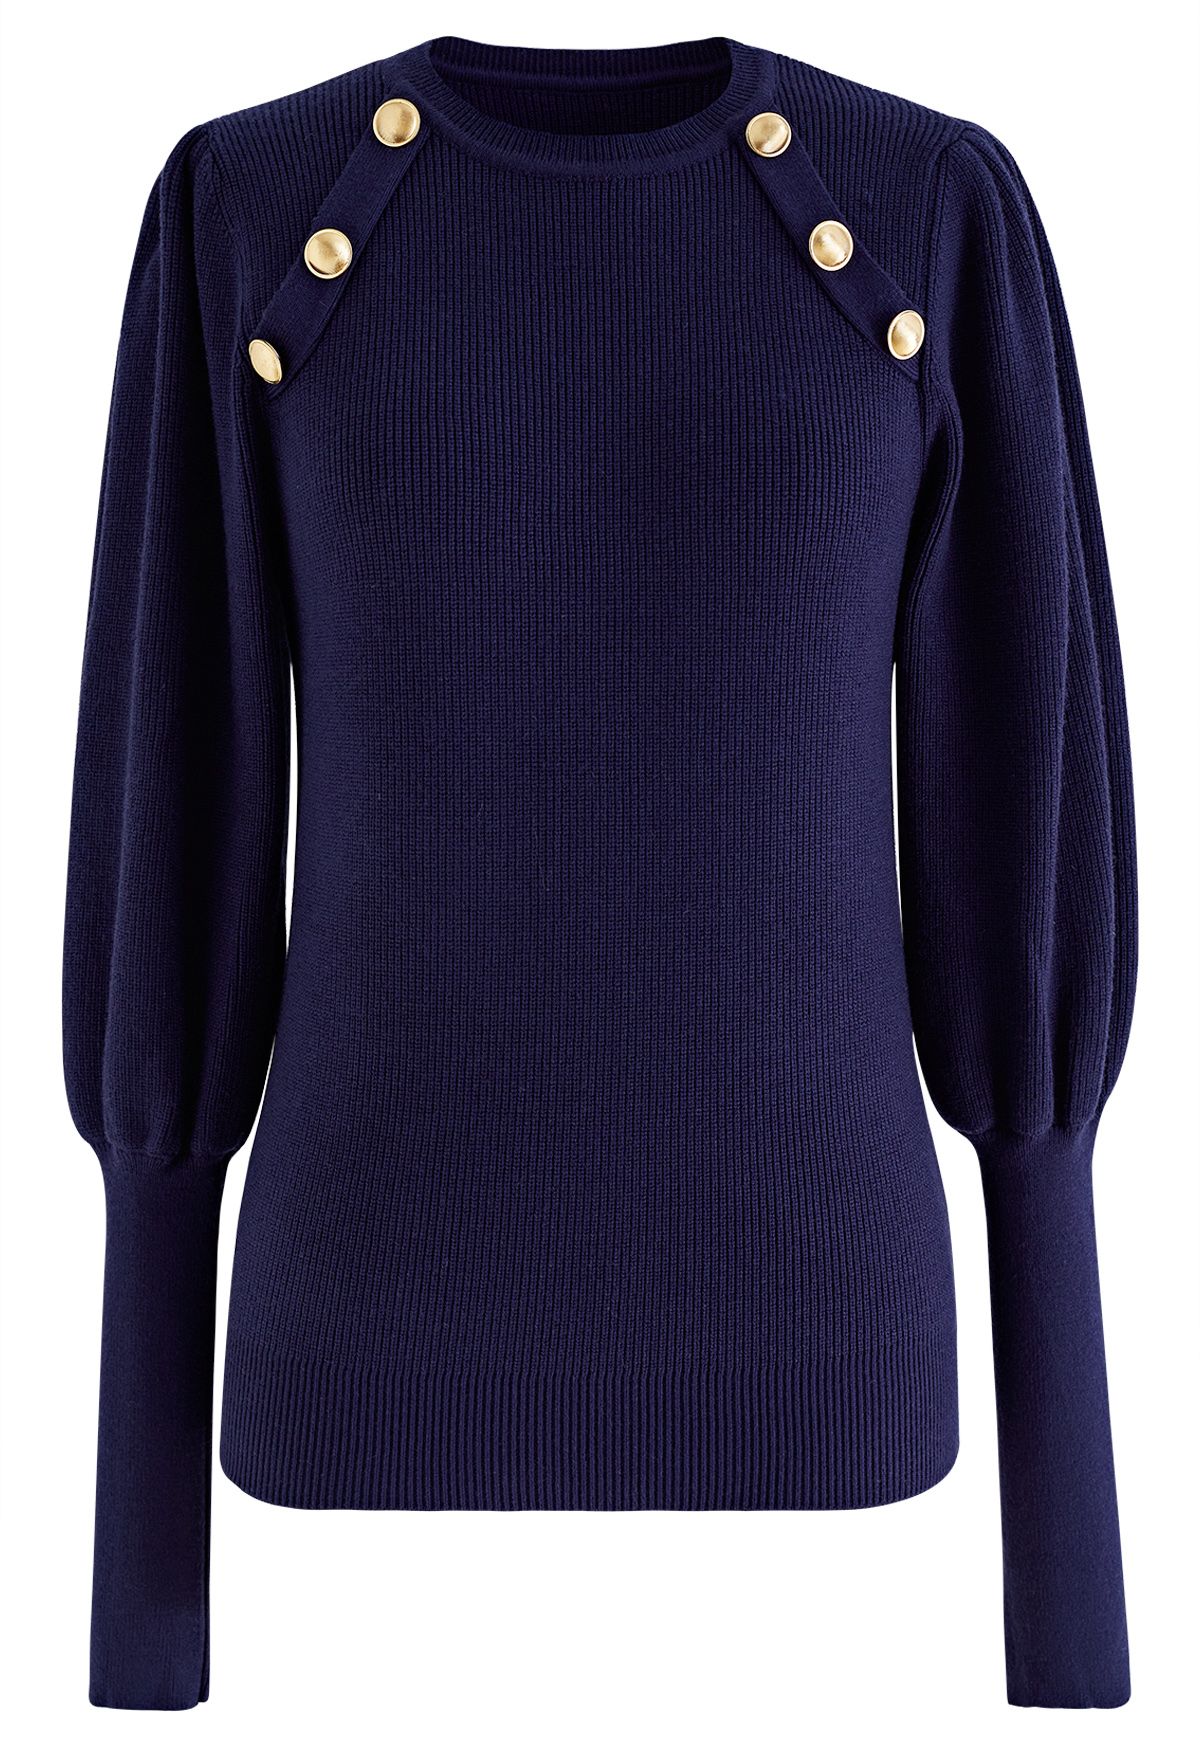 Bubble Sleeves Button Trimmed Knit Top in Navy - Retro, Indie and ...